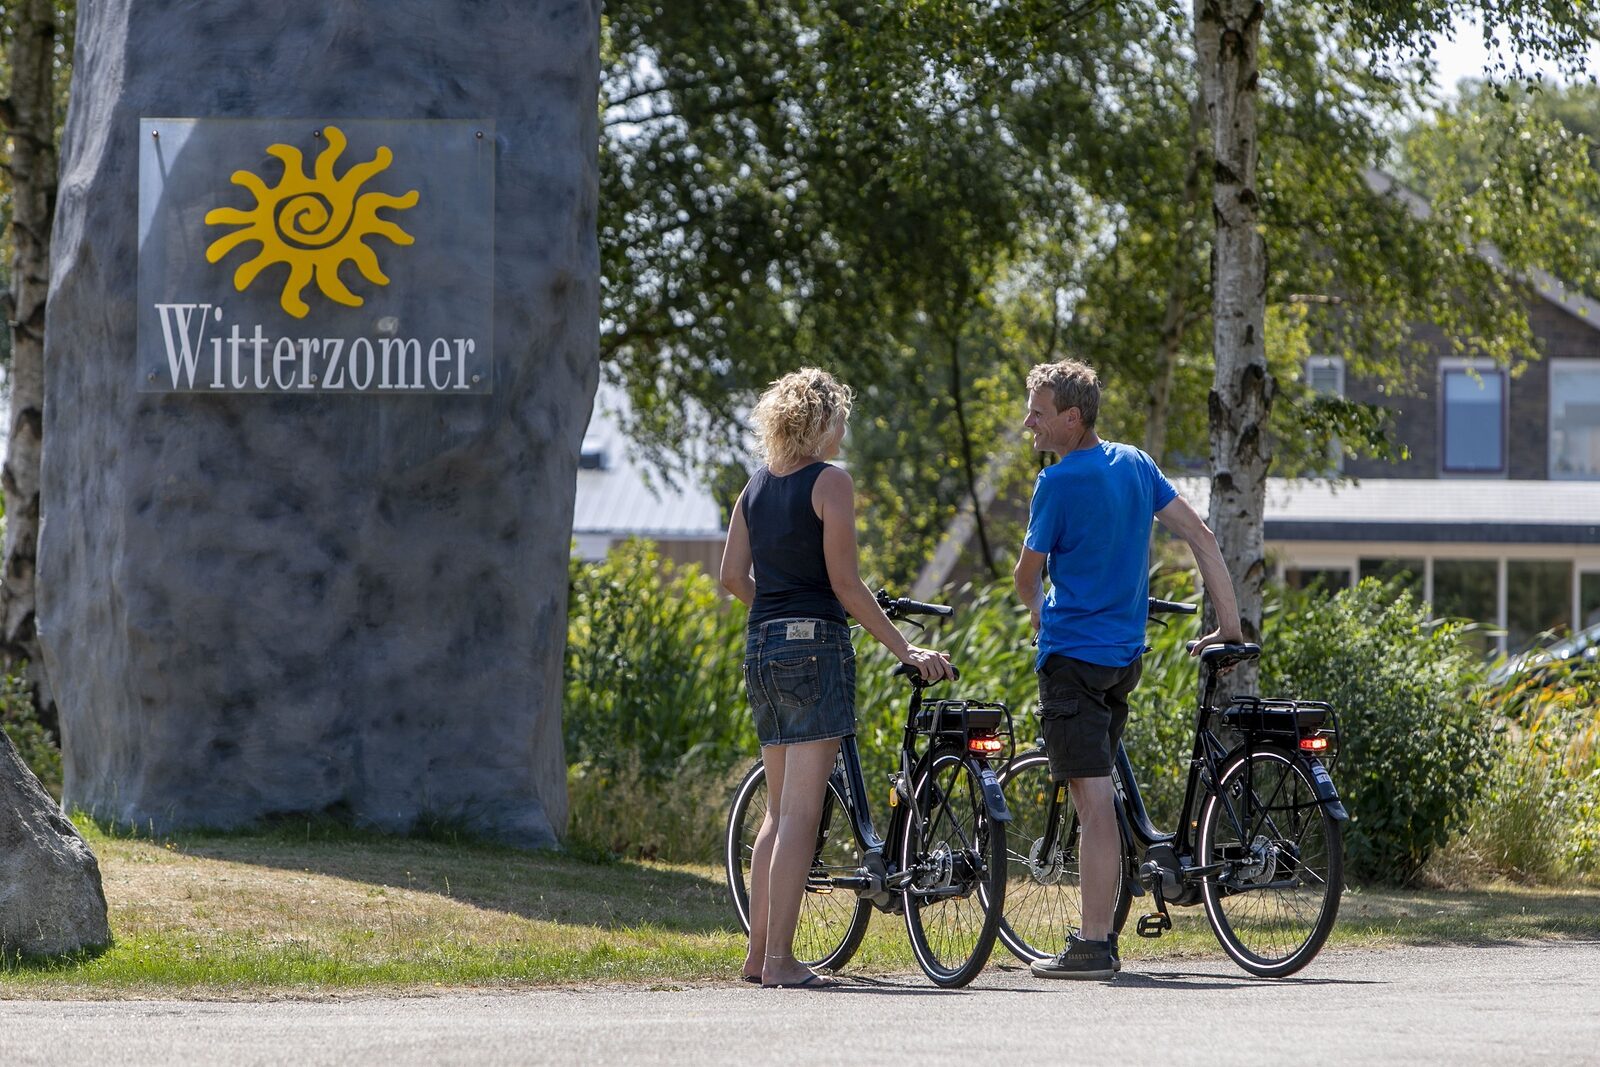 Bicycle and kart rental services Holiday Park Witterzomer